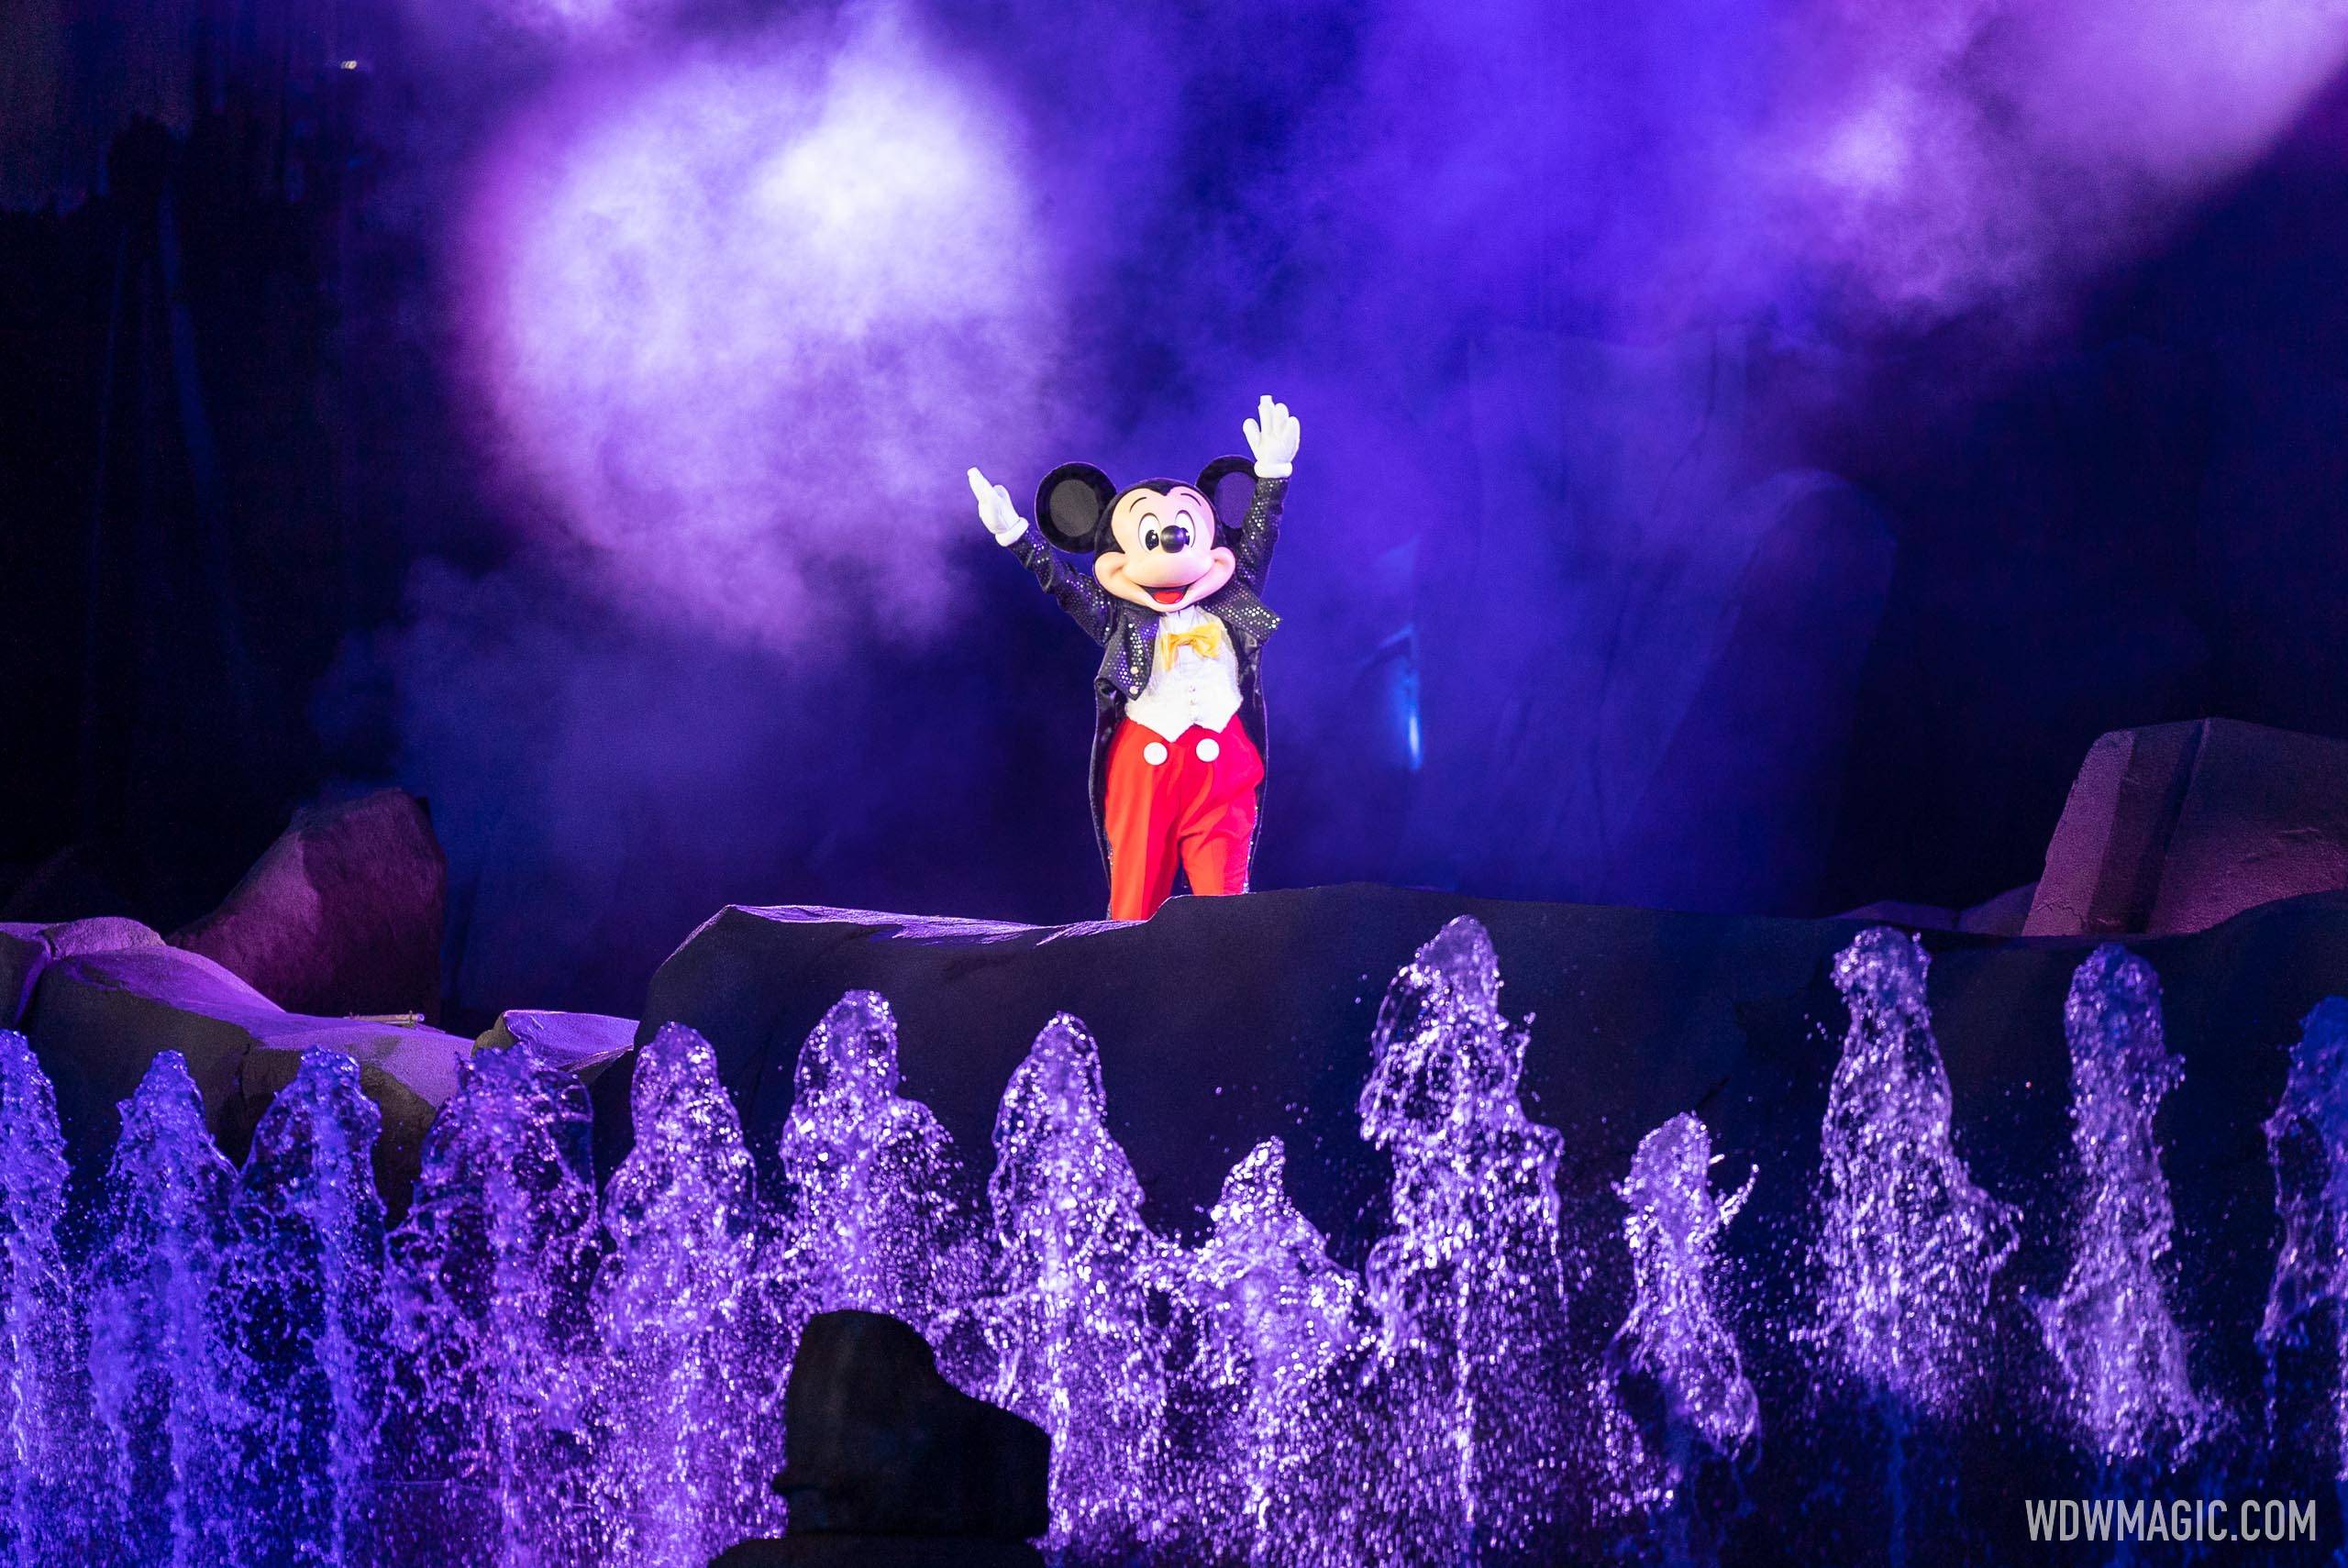 An official clarification on the Fantasmic cuts